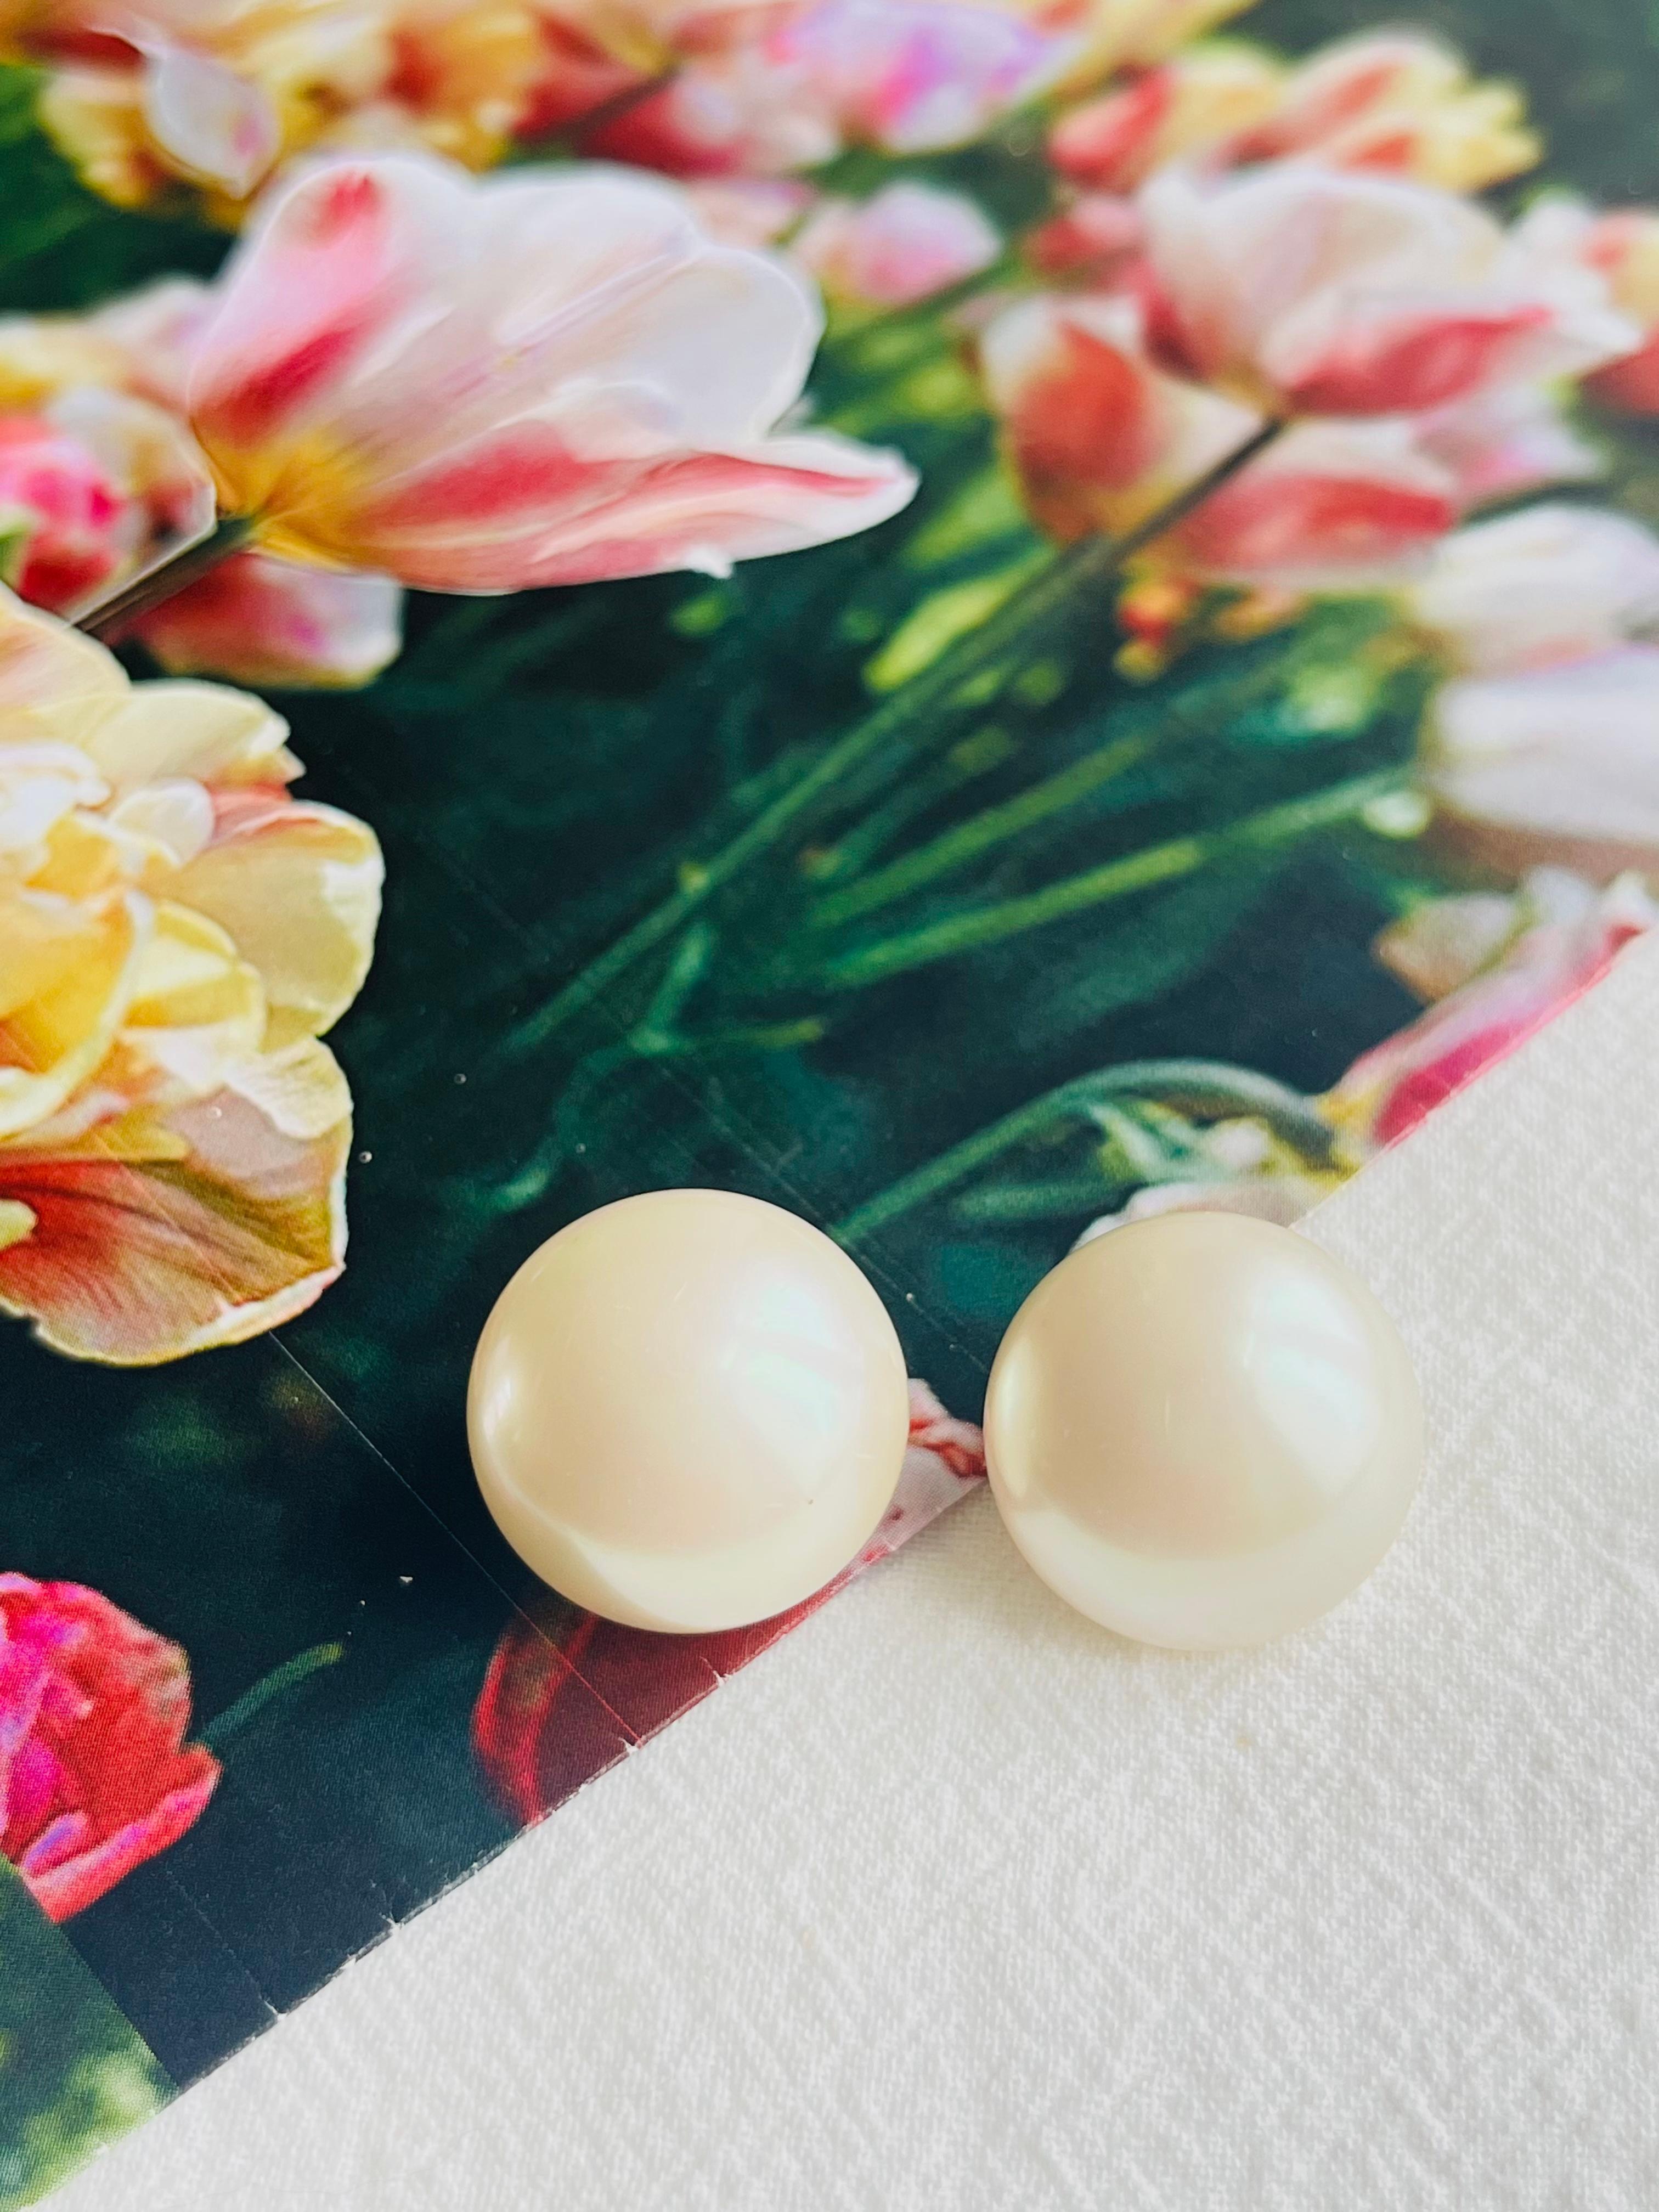 Christian Dior 1970s Vintage Large Round Circle White Pearl Gold Clip Earrings In Excellent Condition For Sale In Wokingham, England